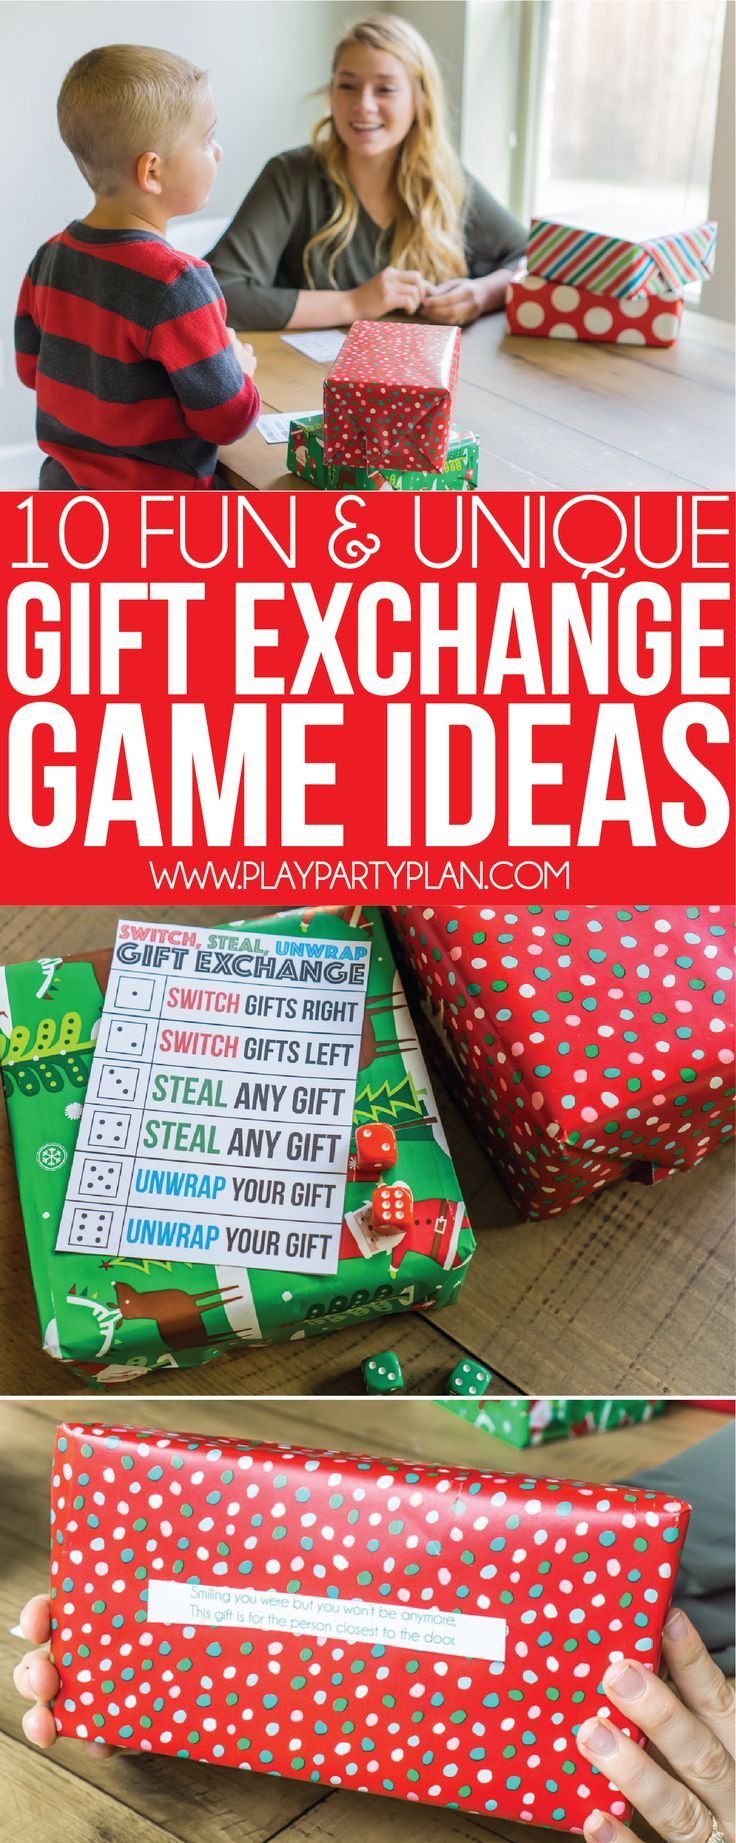 Christmas Party Gifts Exchange Ideas
 The 25 best Christmas exchange ideas ideas on Pinterest